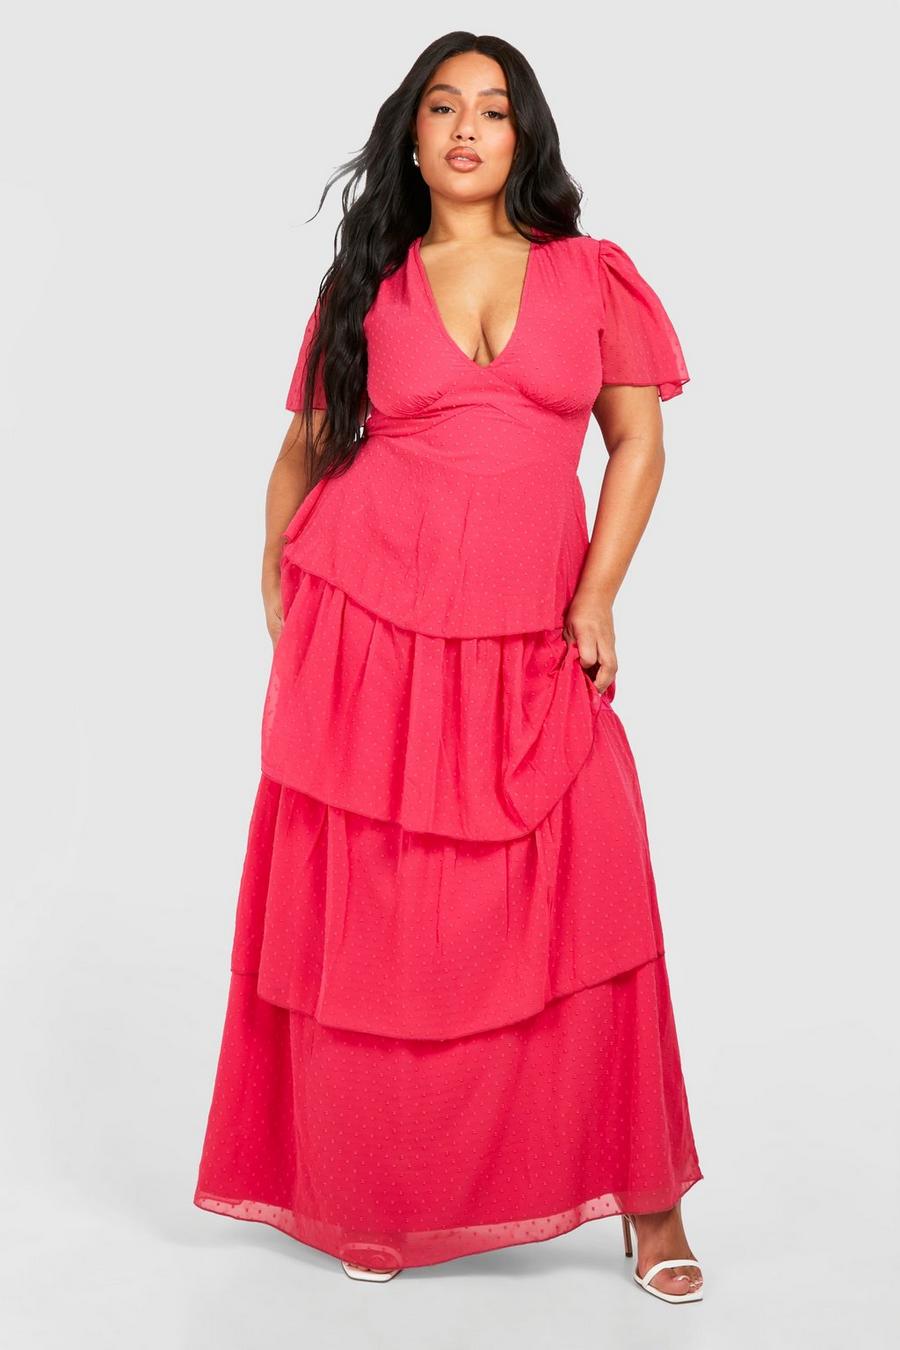 Grande taille - Robe longue à manches larges, Hot pink image number 1